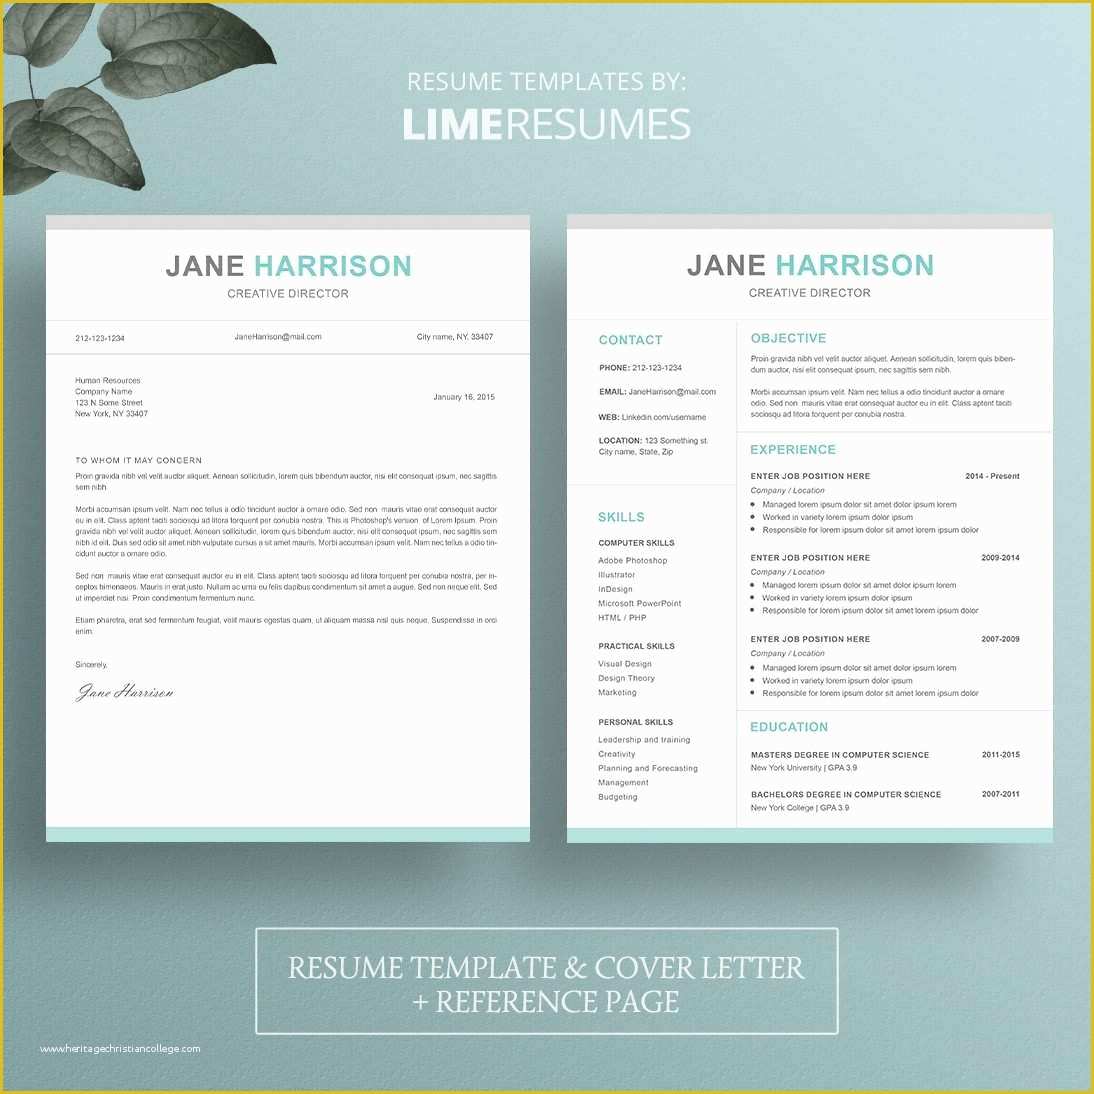 Modern Resume Template Free Download Of Creative Resume Templates Free Download for Microsoft Word